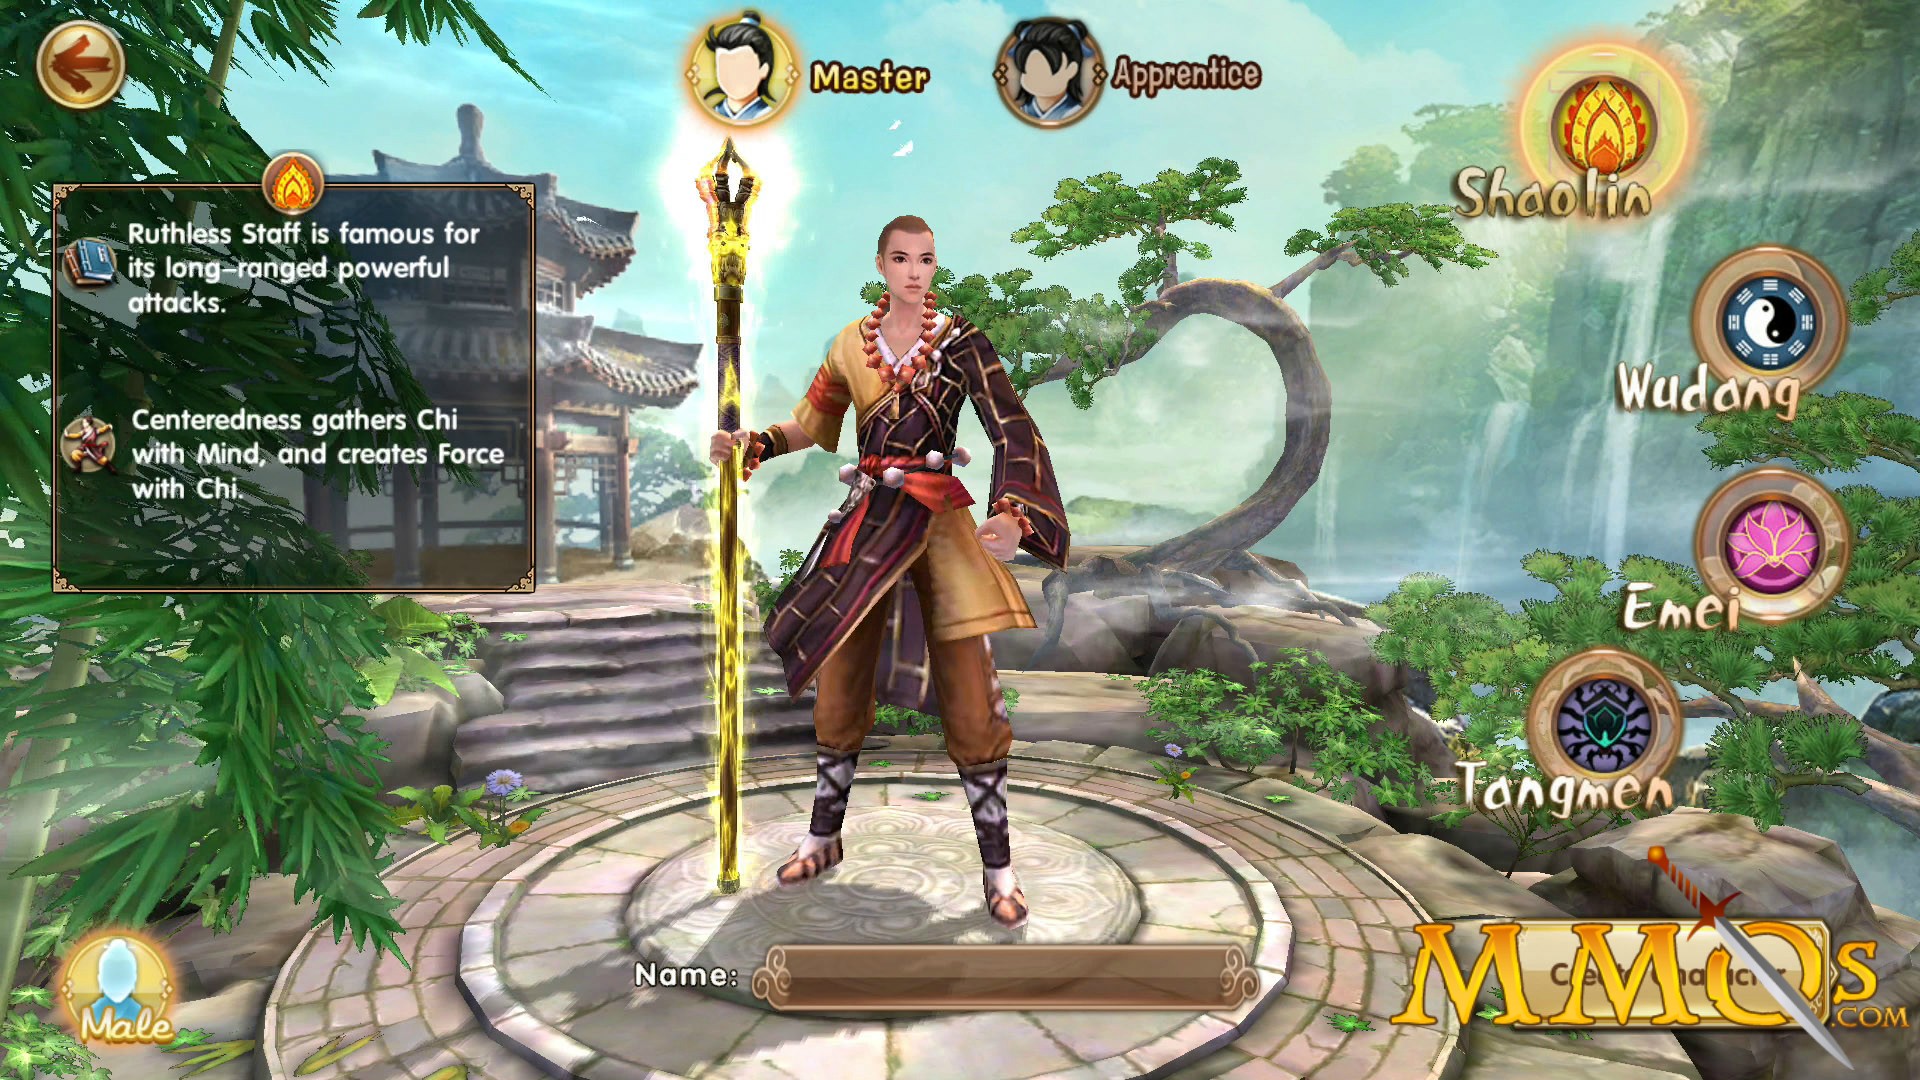 age of wushu 2 release